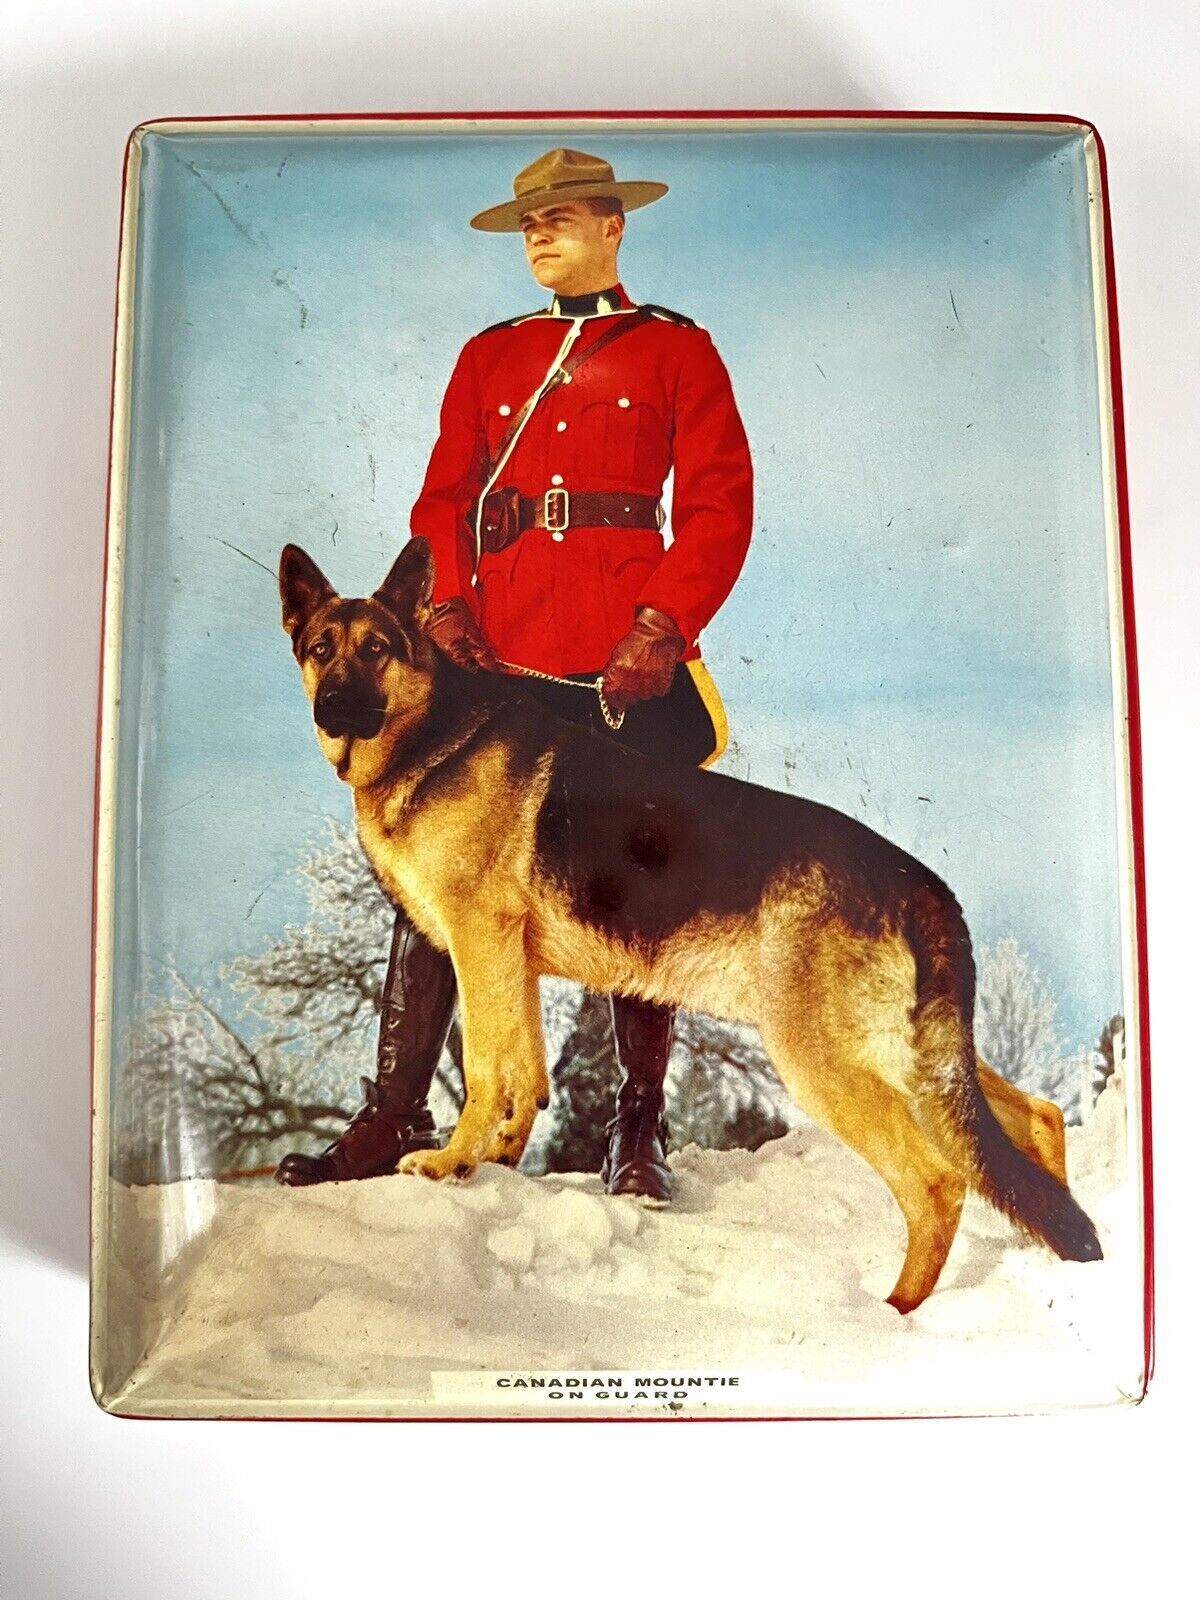 Vintage Riley Brothers Toffee Tin Metal Candy Box Canadian Mountie Shepherd Dog